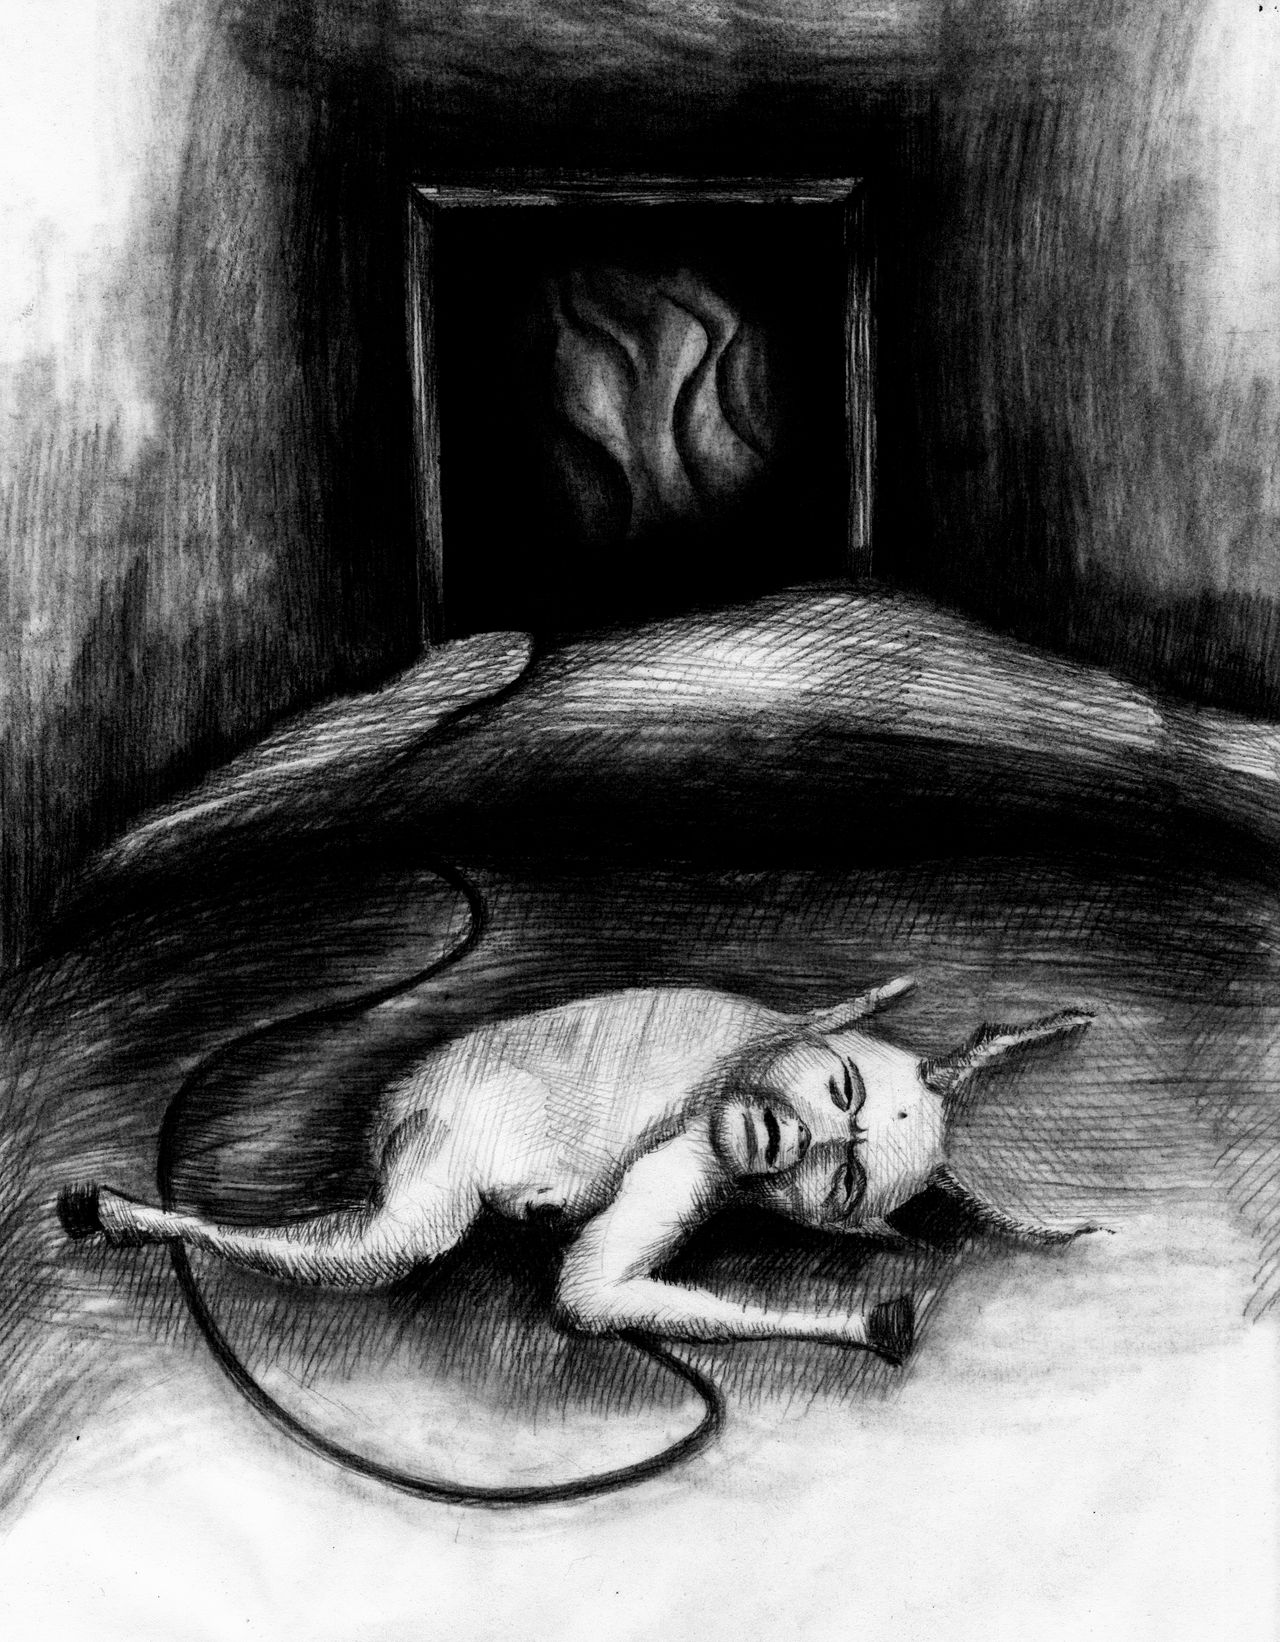 SCP-965 by Avargus on DeviantArt